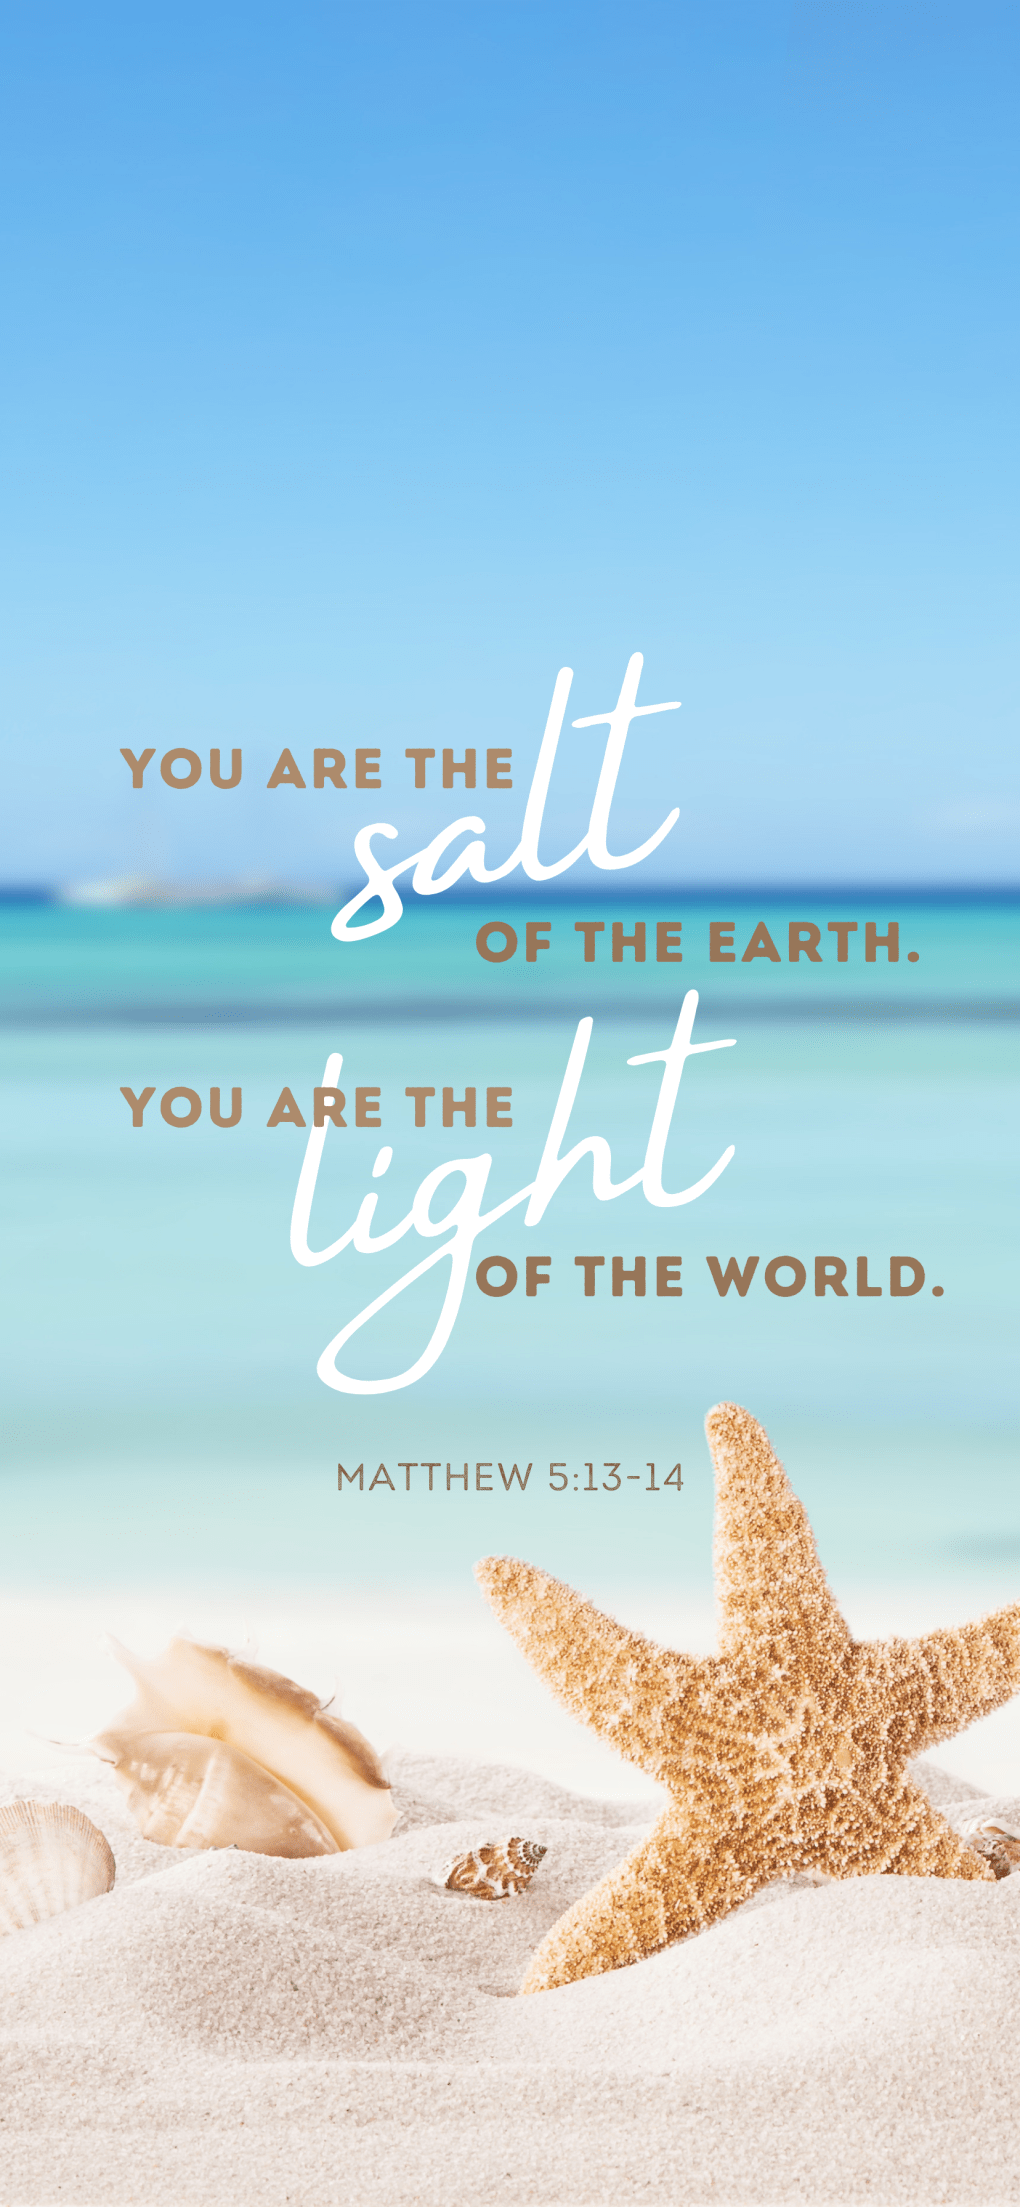 You are the salt of the earth. You are the light of the world.”. Summer Phone Lock Scre. Phone lock screen wallpaper, Summer wallpaper, Screen savers wallpaper